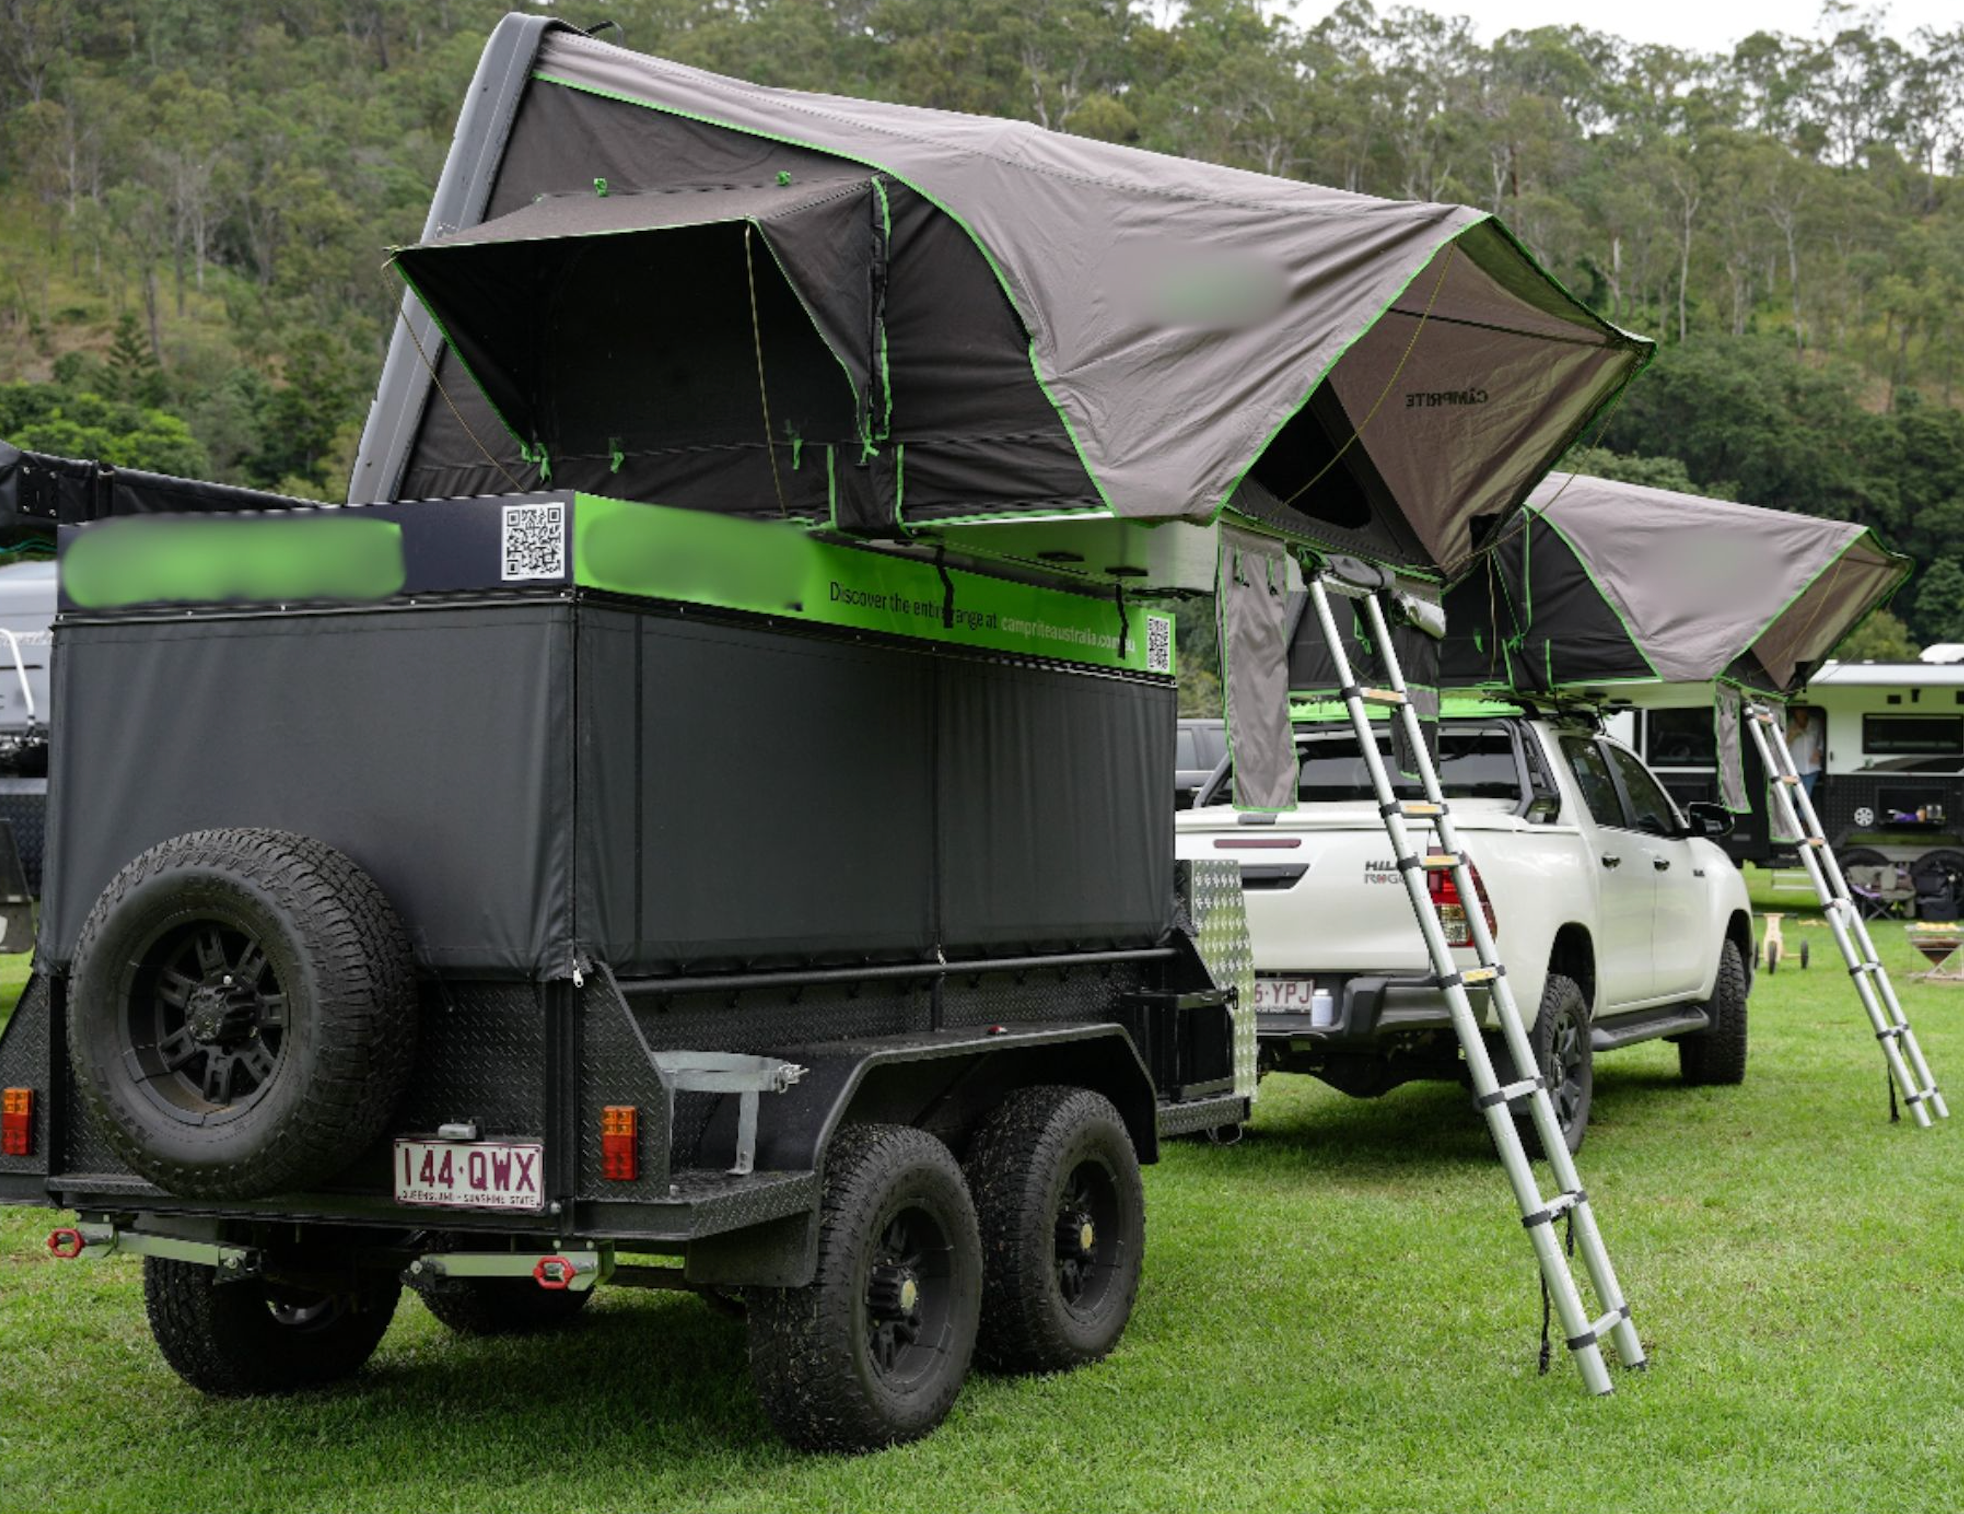 Southern Cross Roof Top Tent XLarge